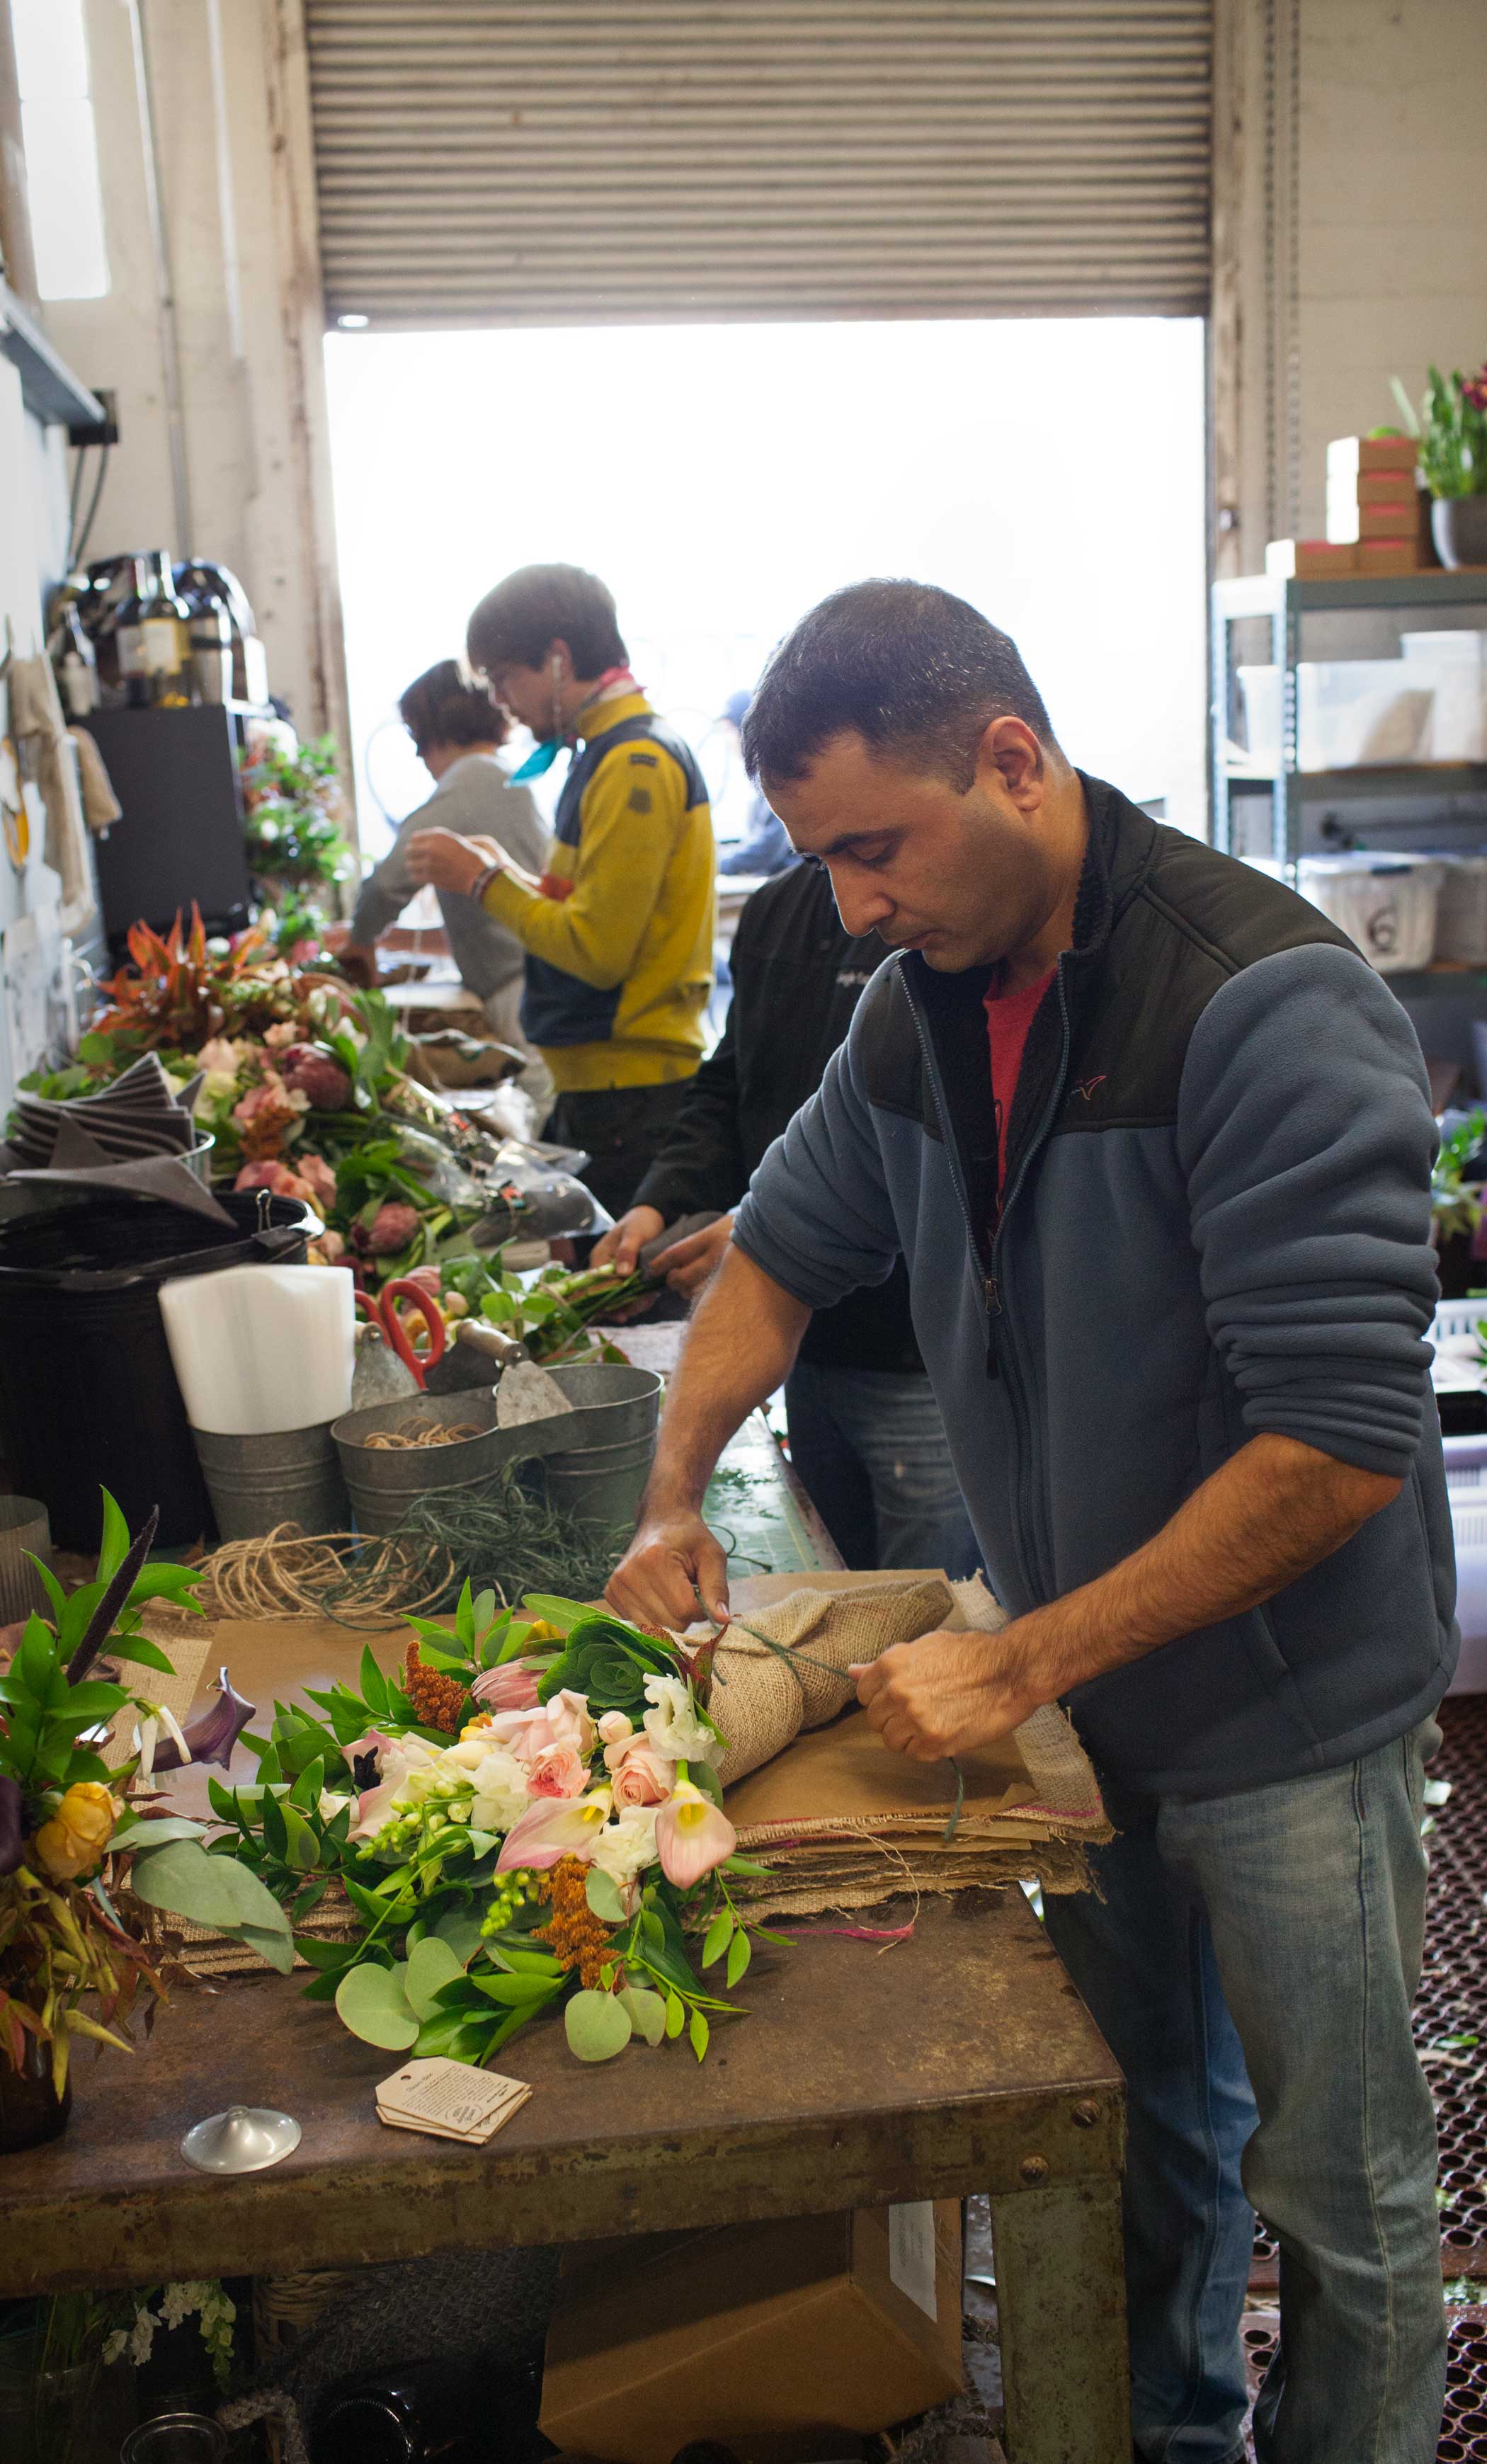 An employee adds wraps a bouquet in burlap before delivery.